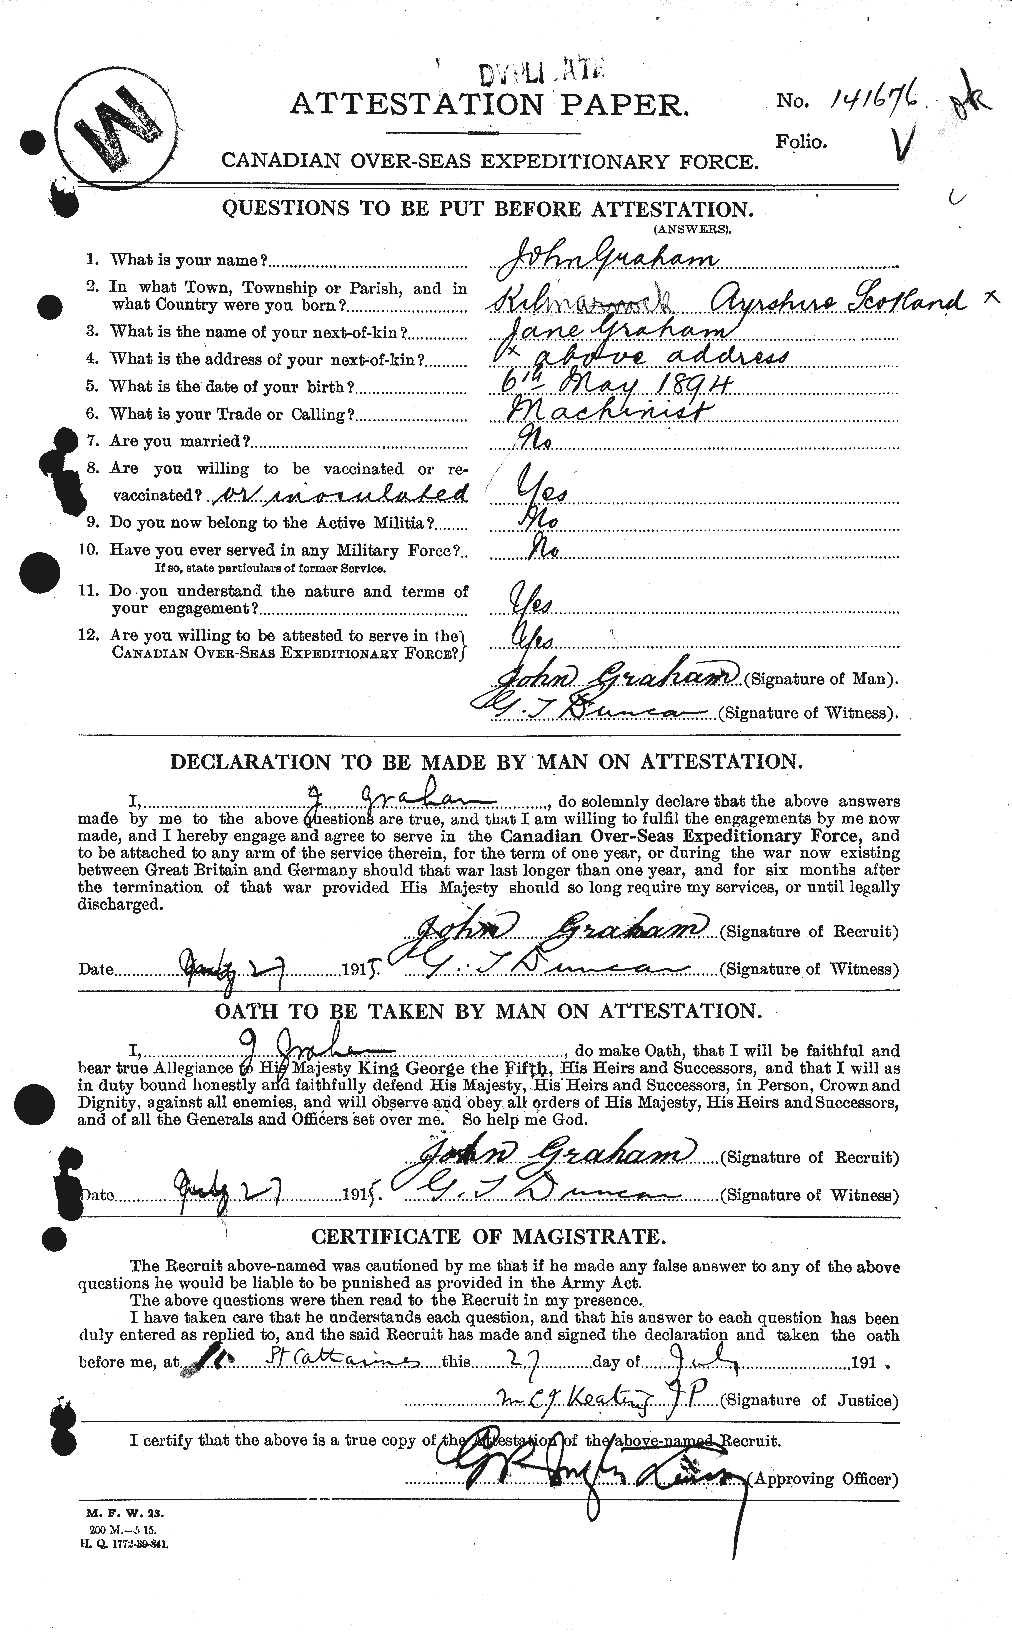 Personnel Records of the First World War - CEF 359118a